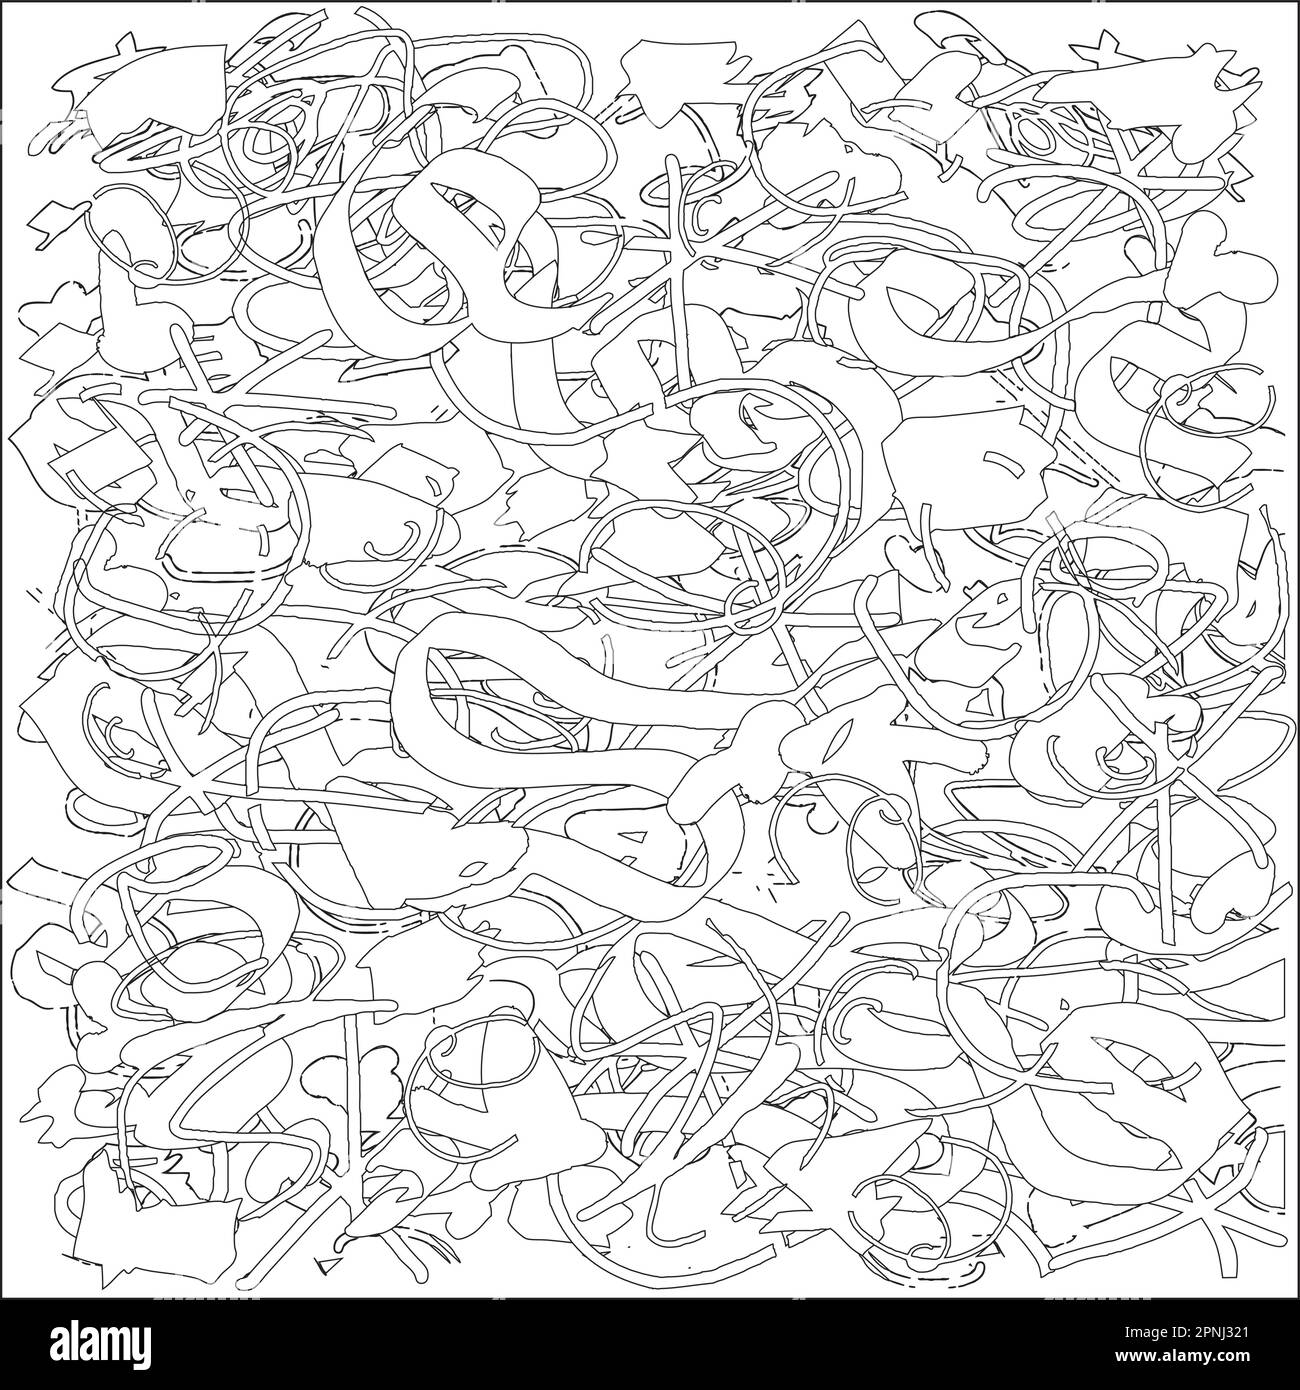 Doodle Handdrawn Street Art Design, Black and White, Coloring Page, Abstract Vibrant Line Illustration, Tablet Notebook Sketch Stock Vector